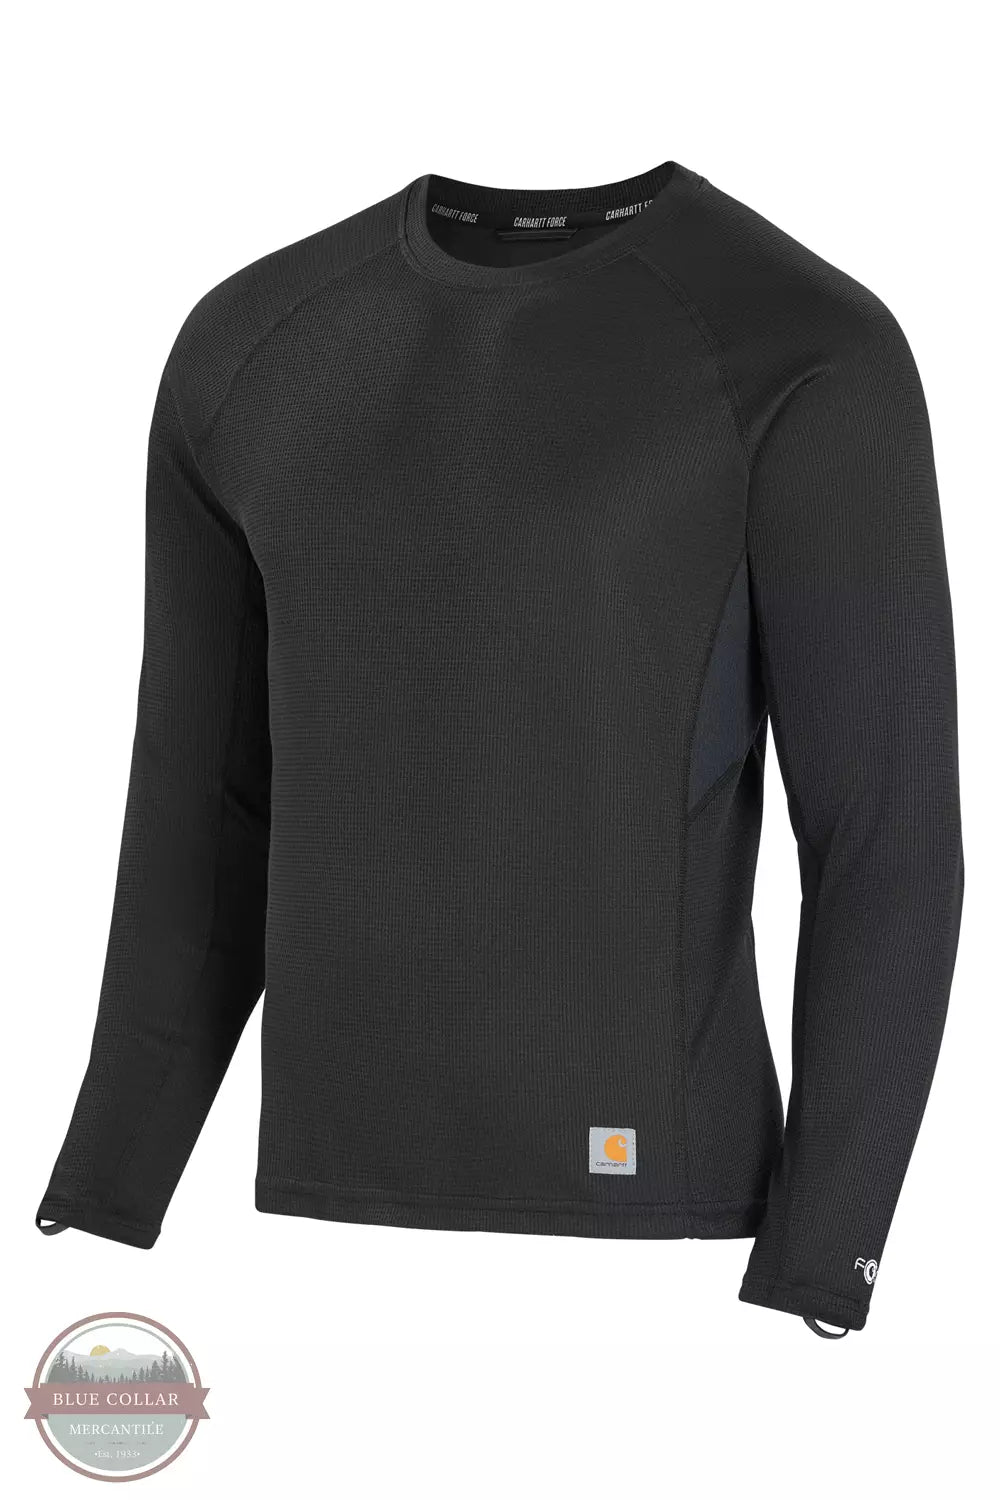 Carhartt UM0223M Force Midweight Micro-Grid Long Sleeve Base Layer Top Black Front View